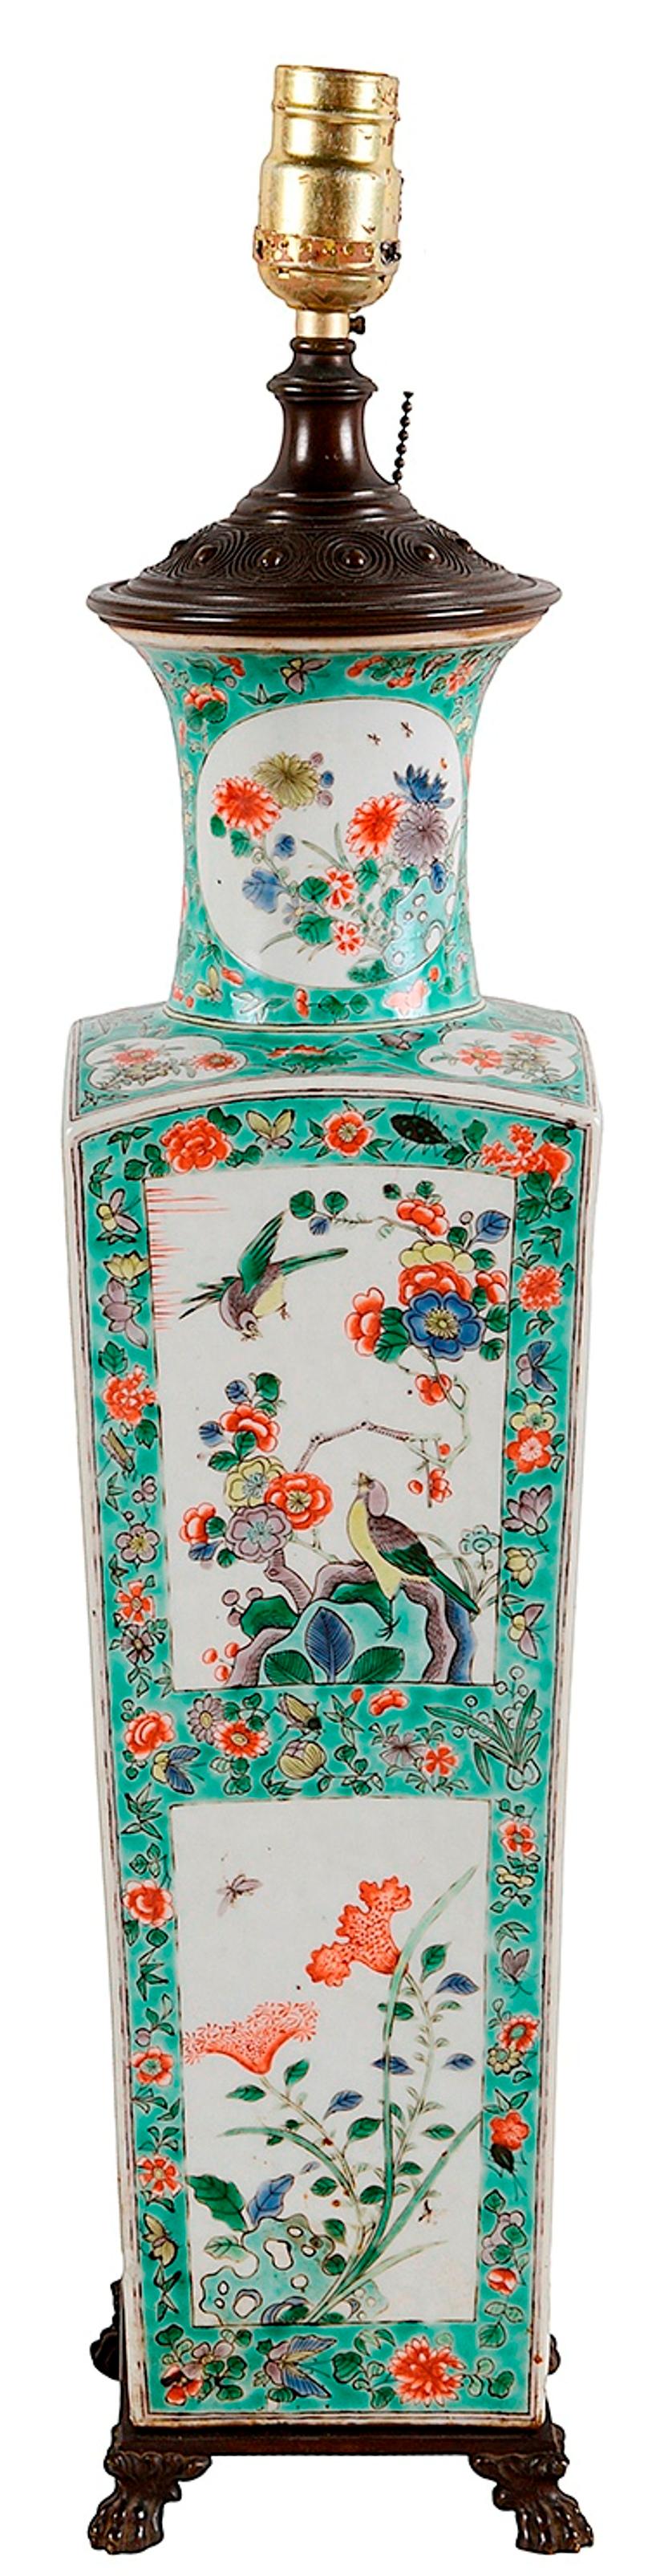 A very good quality 19th century Chinese Famille Verte vase or lamp. Having wonderful hand painted inset panels to the green ground, depicting birds, flowers and various plants. Tapering form, raised on bronze claw feet. Measures: 53cm (21